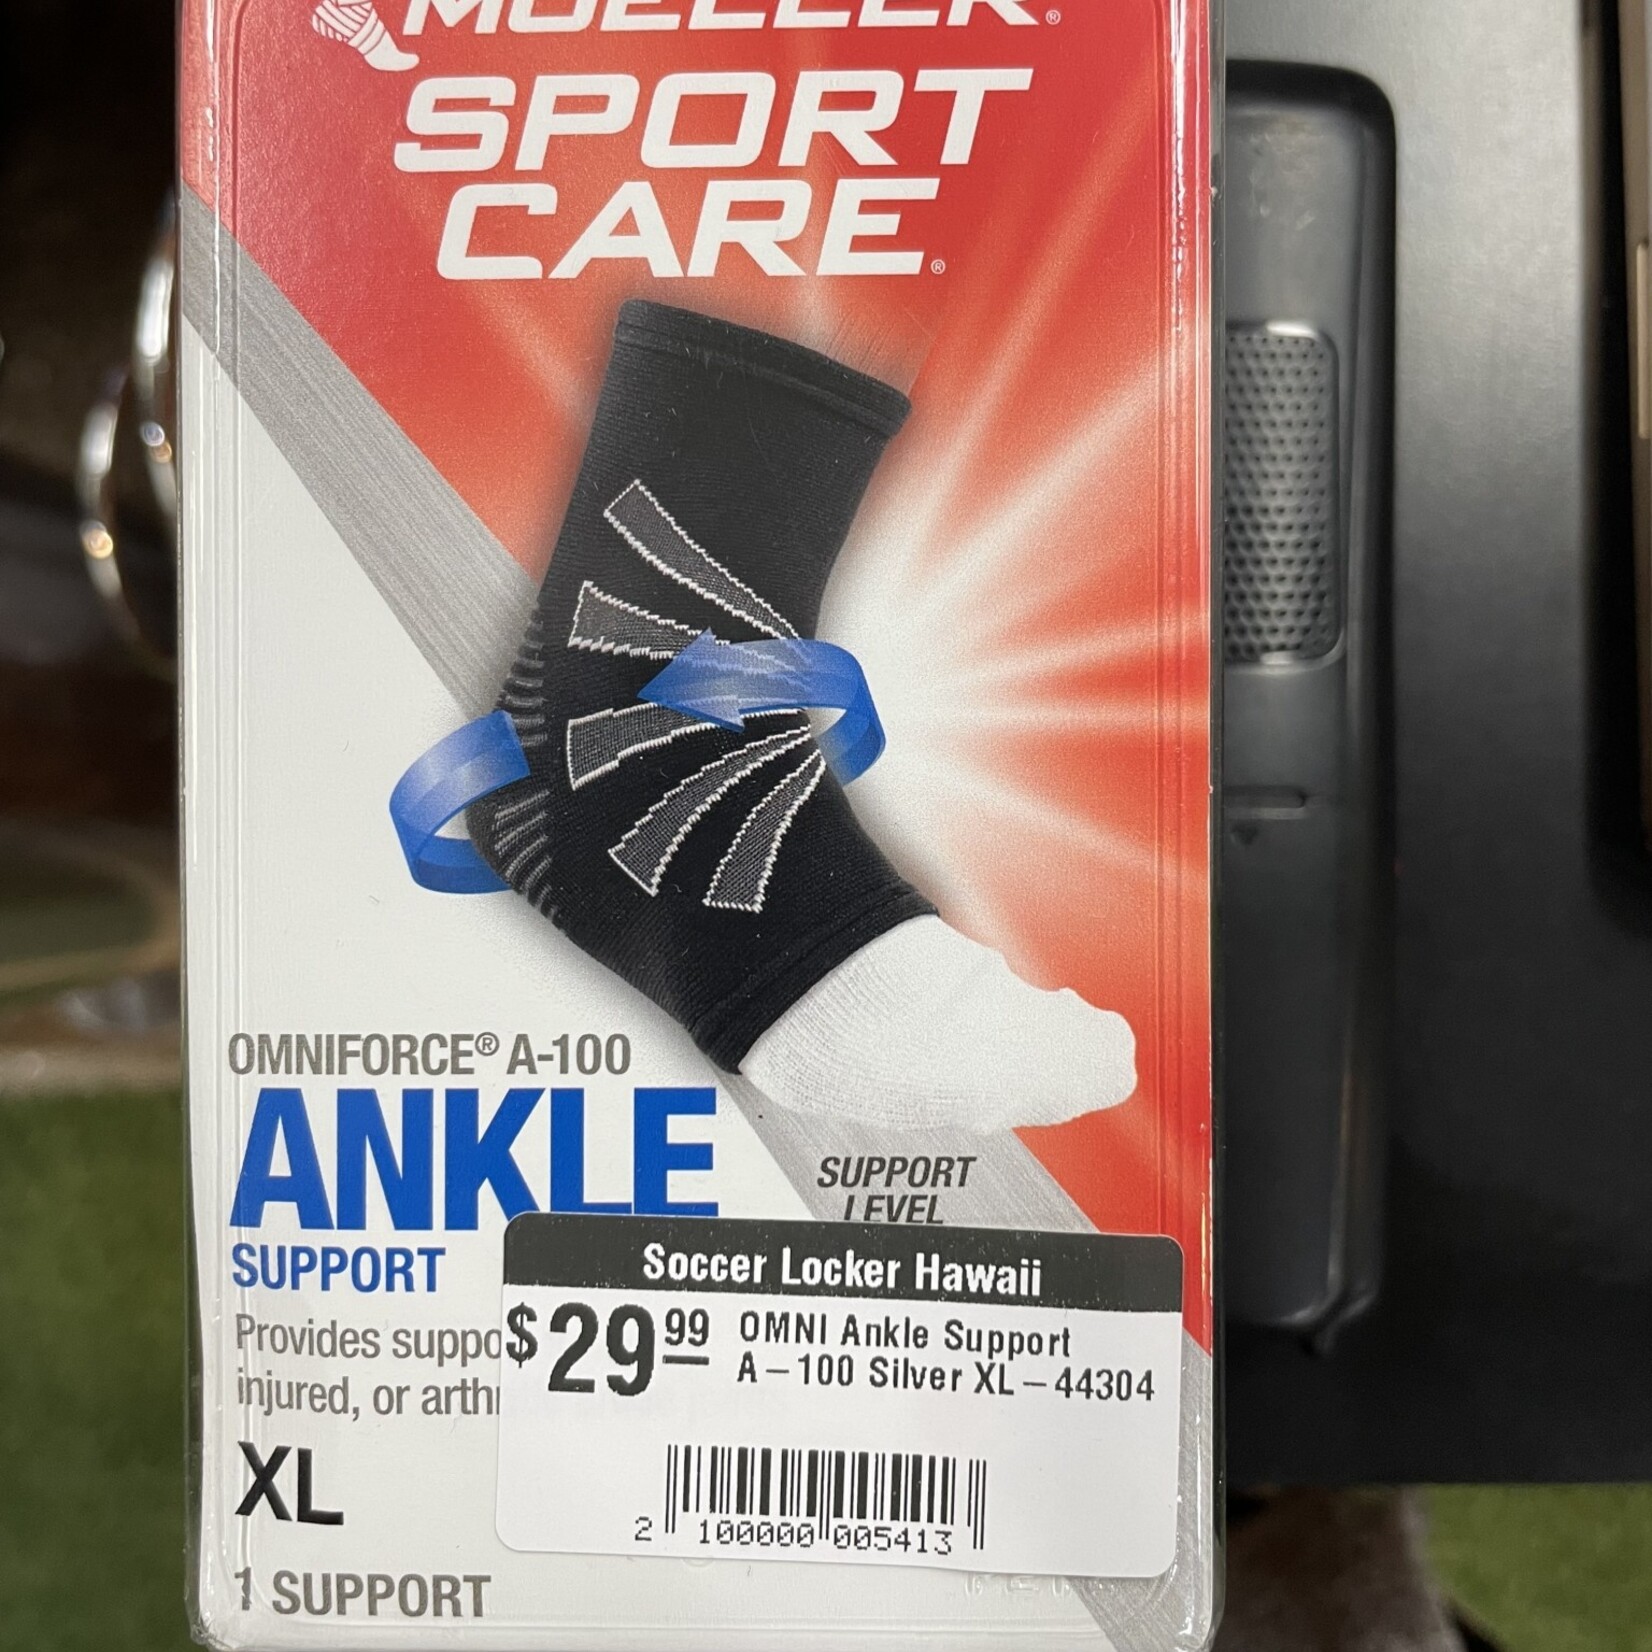 Mueller OMNI Ankle Support A-100 Silver XL-44304